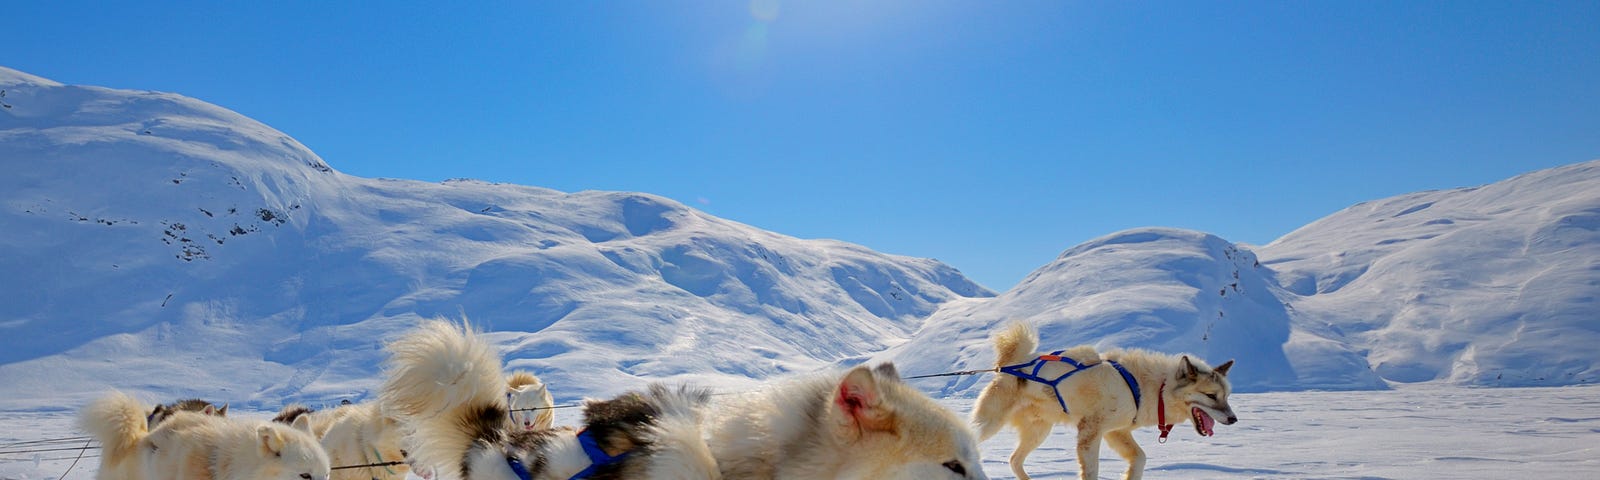 A group of husky dogs runs and pulls a sled across the snow under the shining sun.